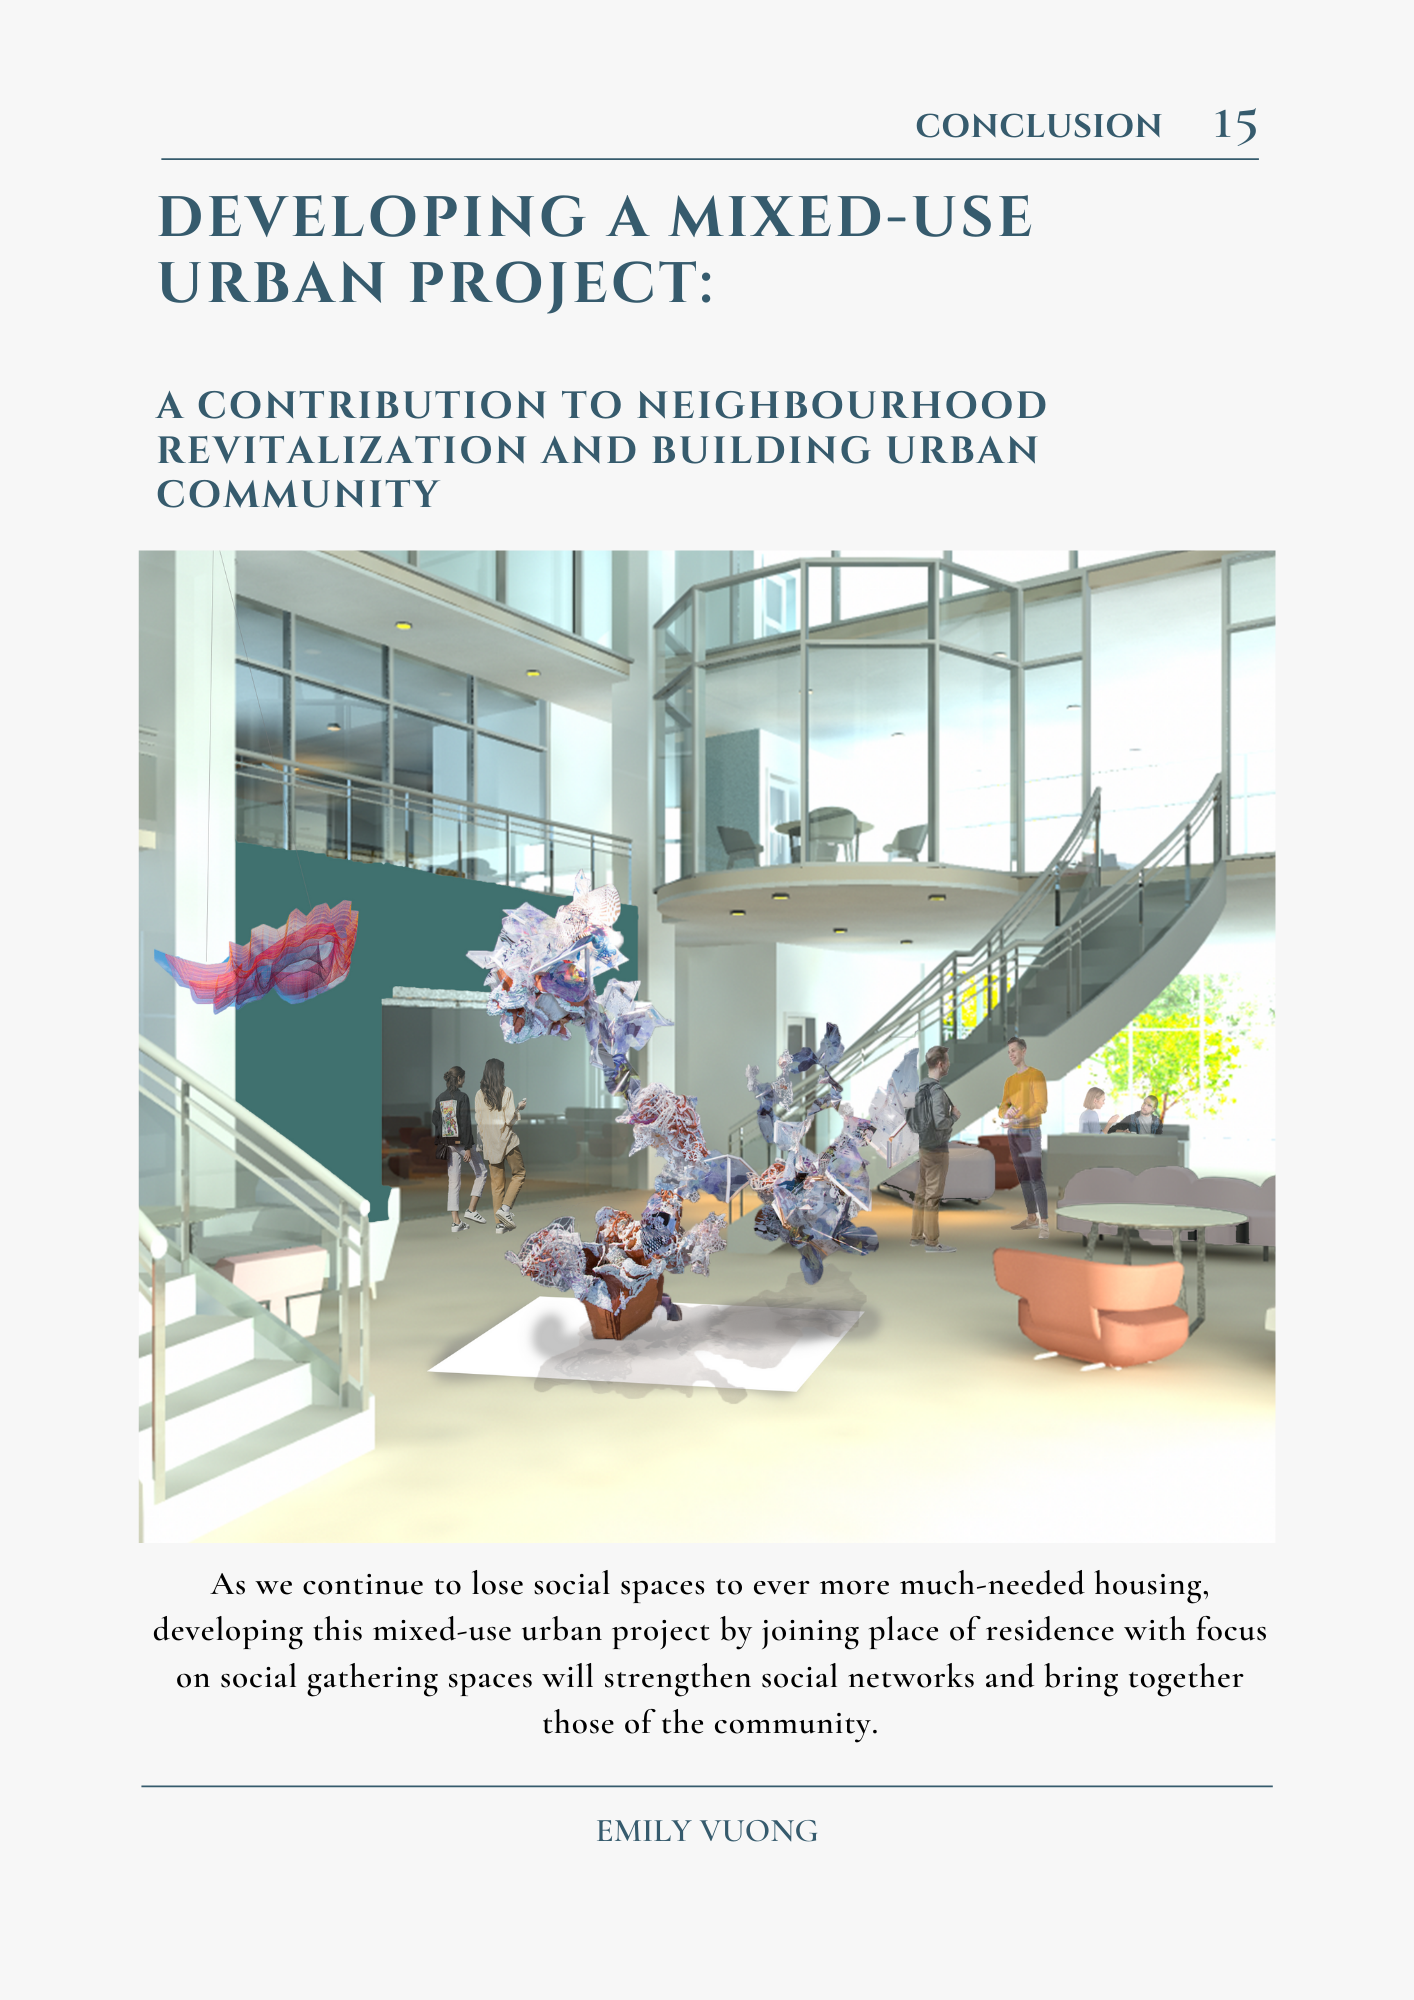 Developing A Mixed-Use Urban Project: A Contribution to Neighbourhood Revitalization and Building Urban Community